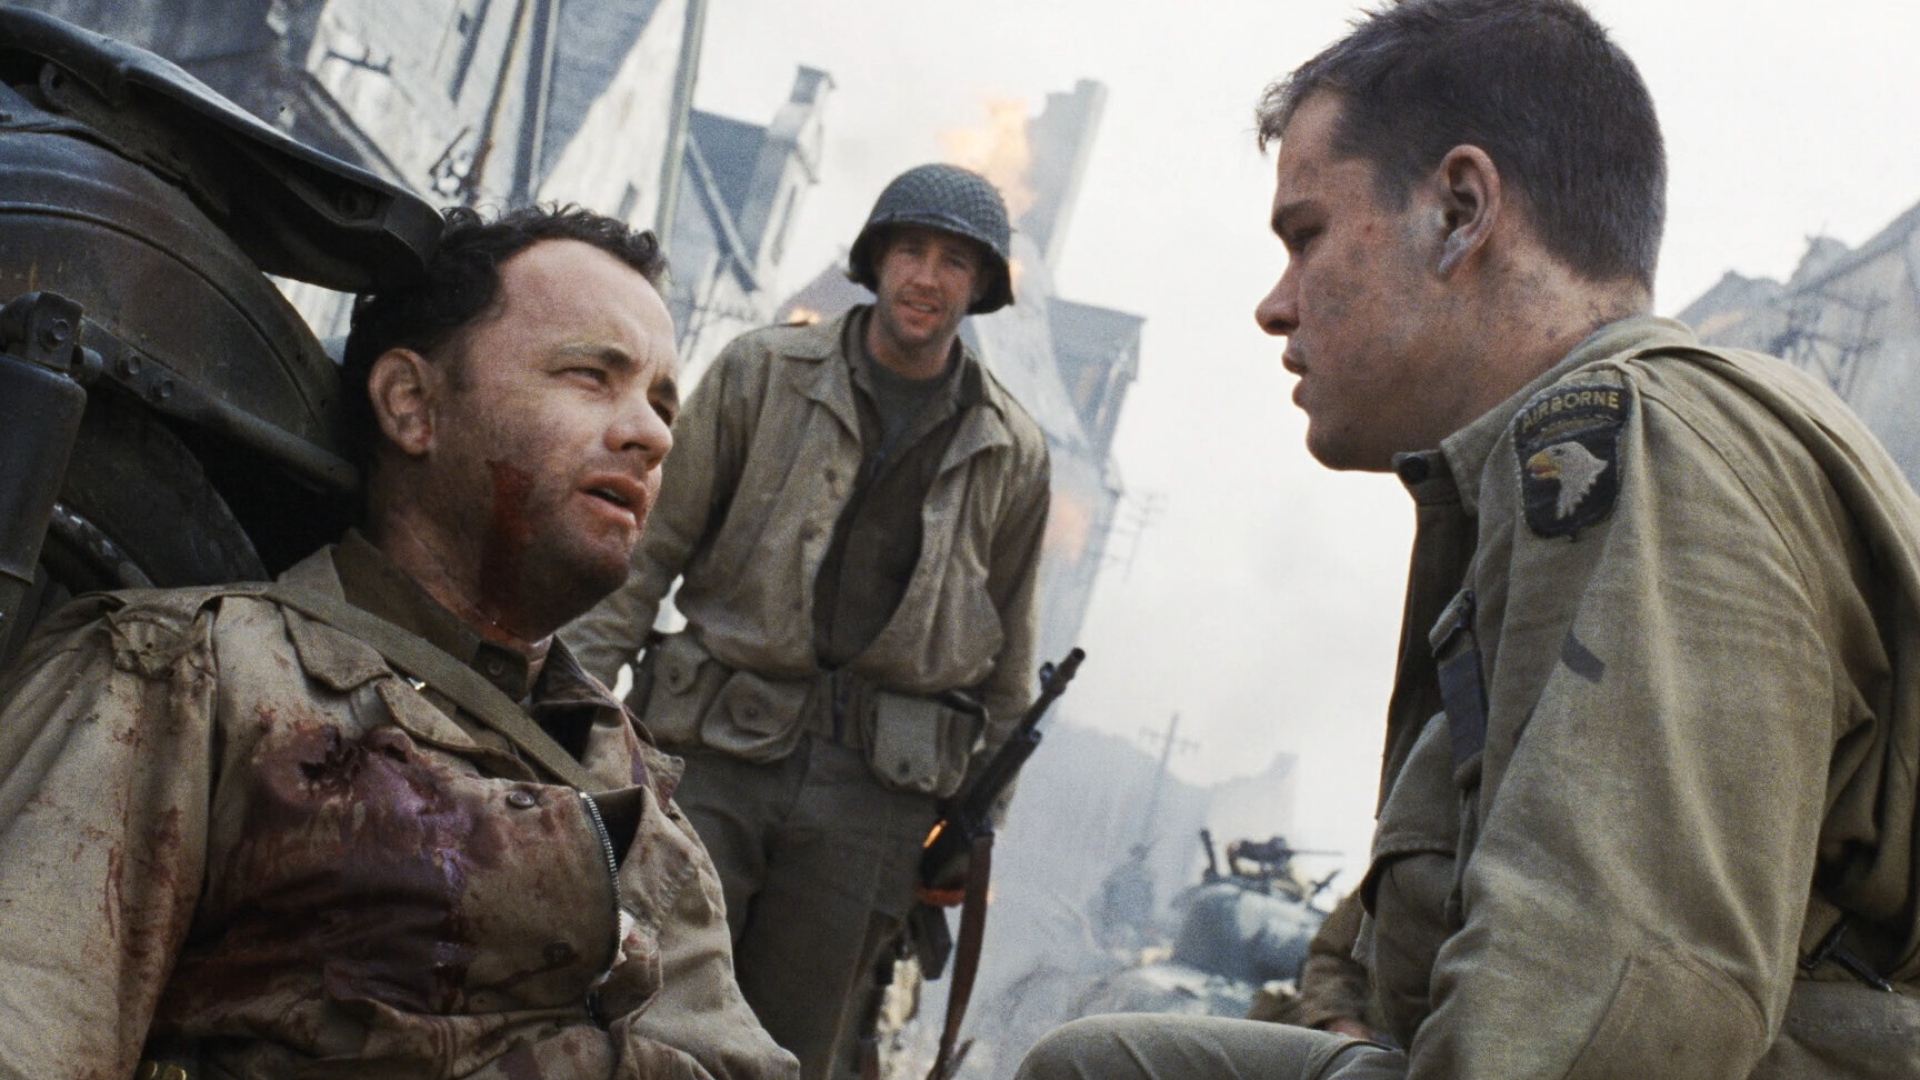 Saving Private Ryan: The Omaha Beach scene cost $11 million to shoot, and involved up to 1,000 extras. 1920x1080 Full HD Background.